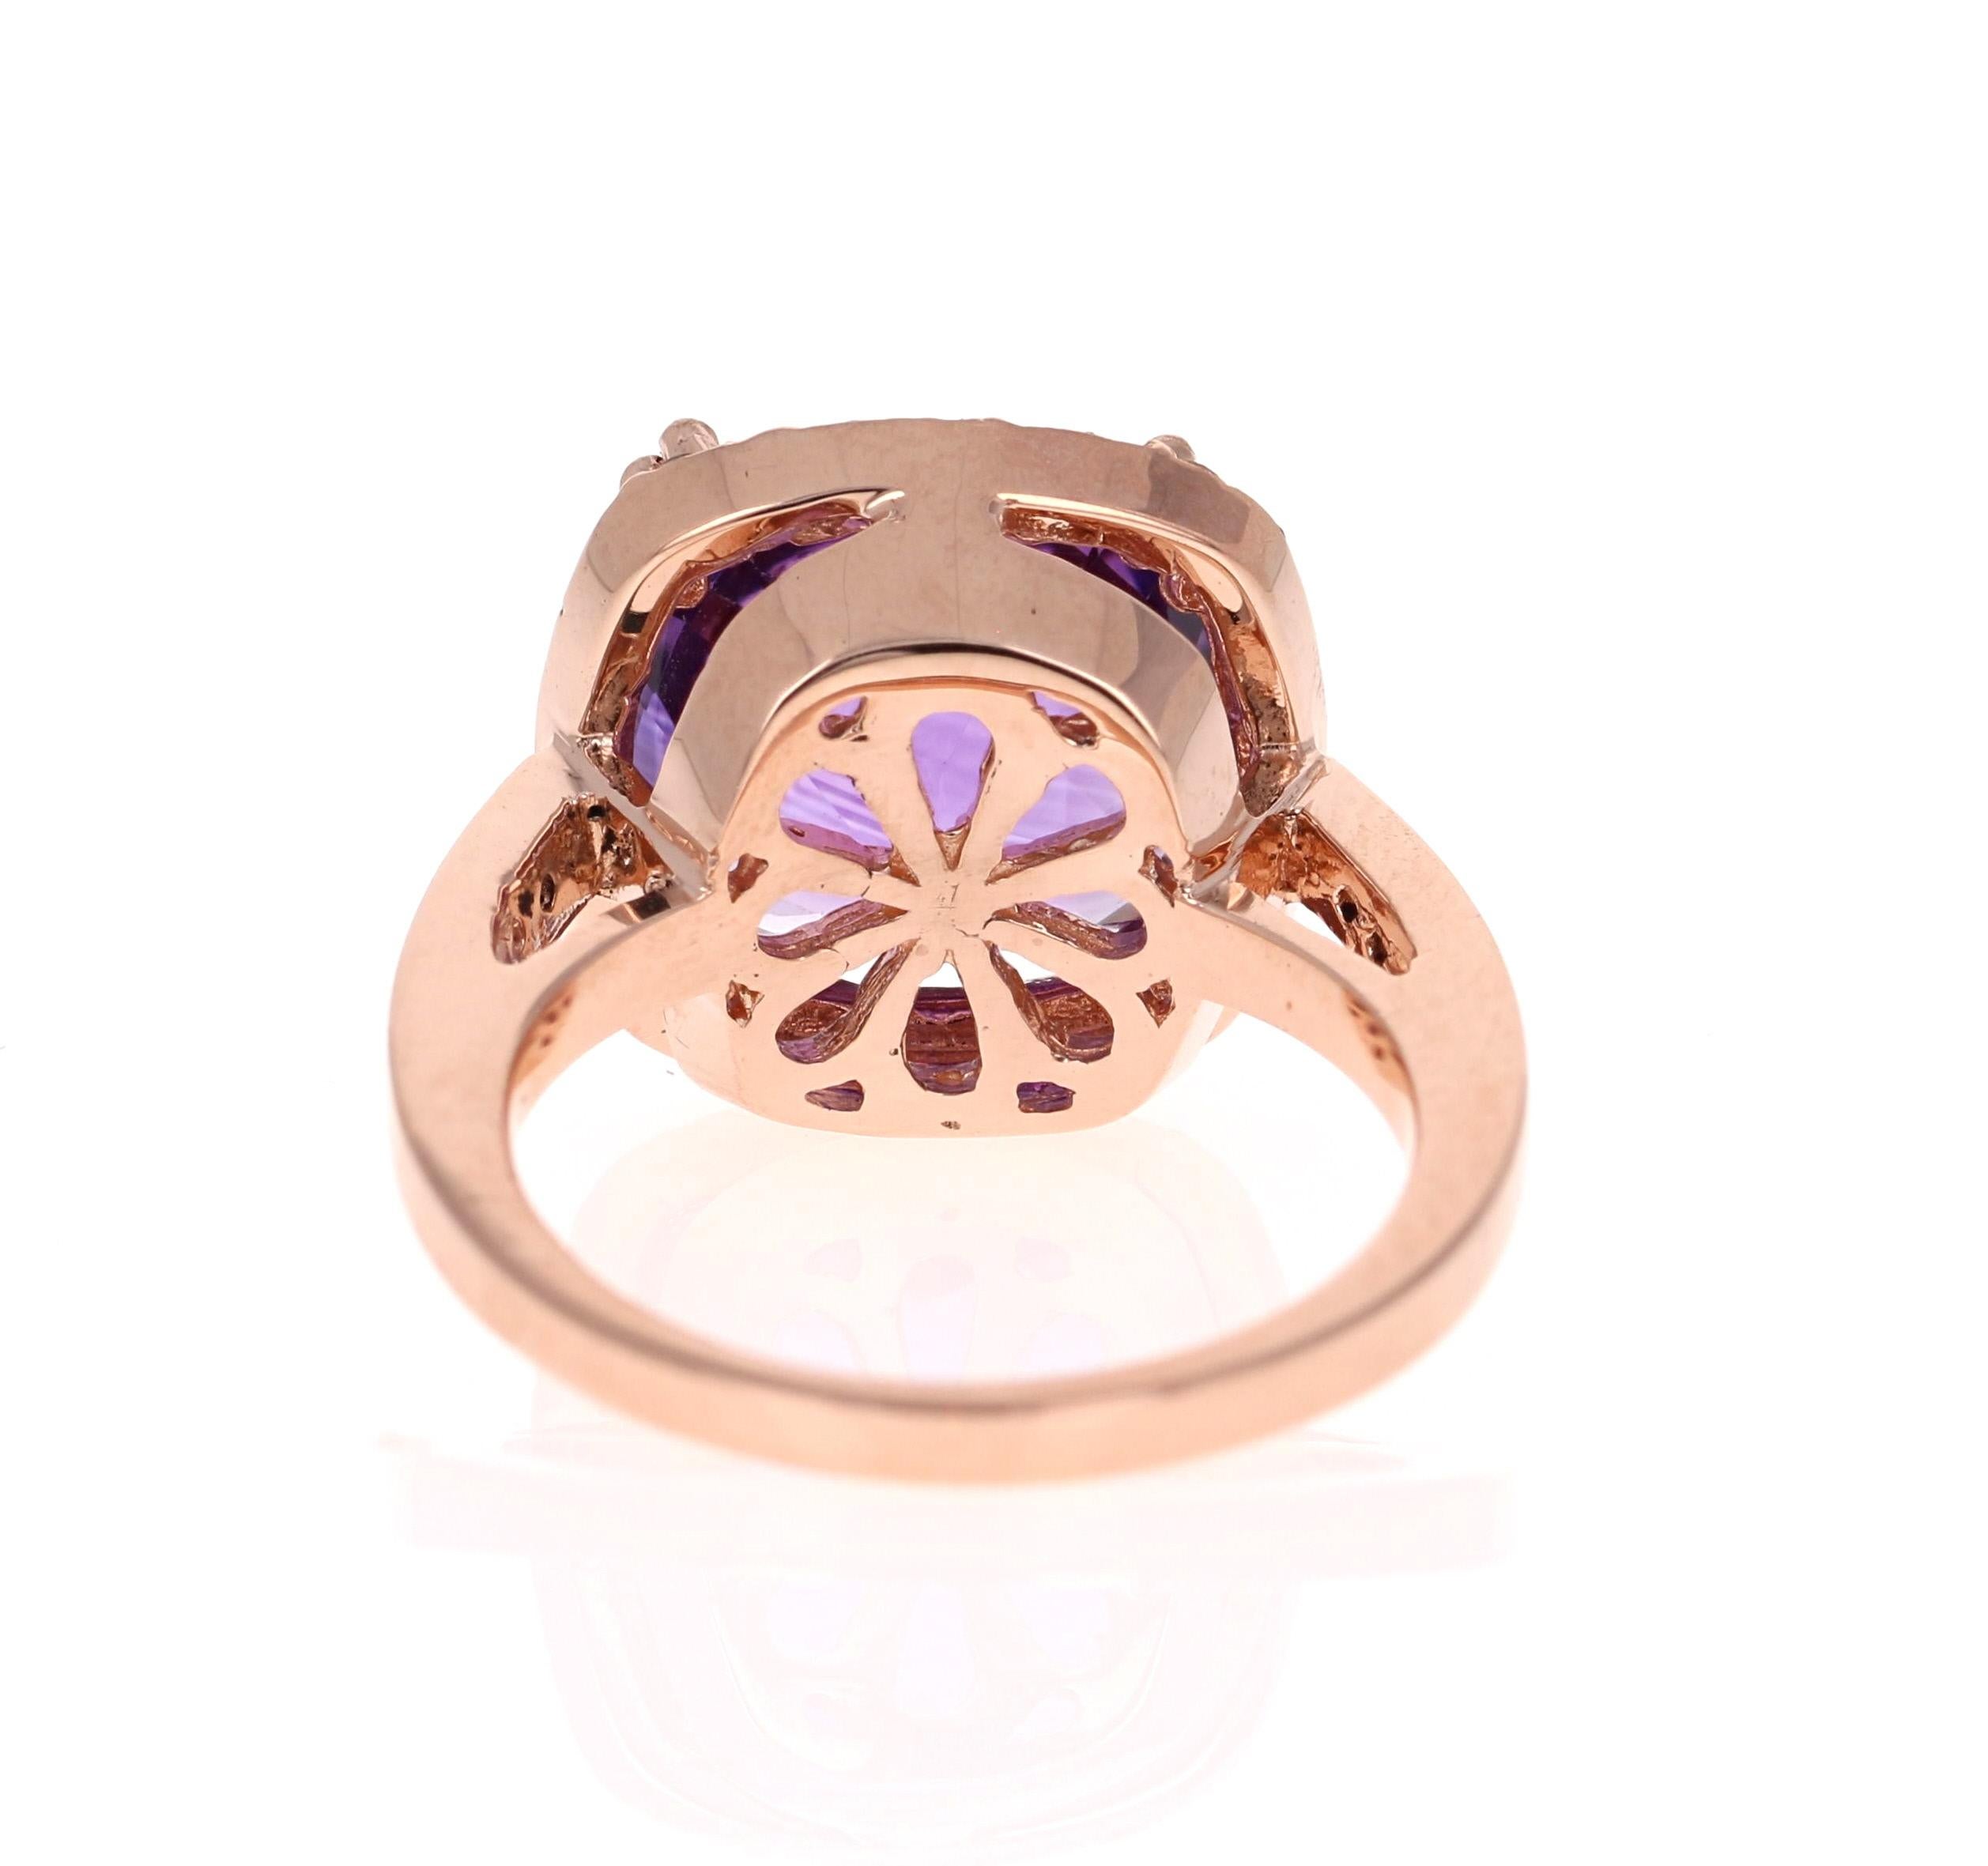 Contemporary 7.11 Carat Amethyst Pink Sapphire Diamond Rose Gold Cocktail Ring